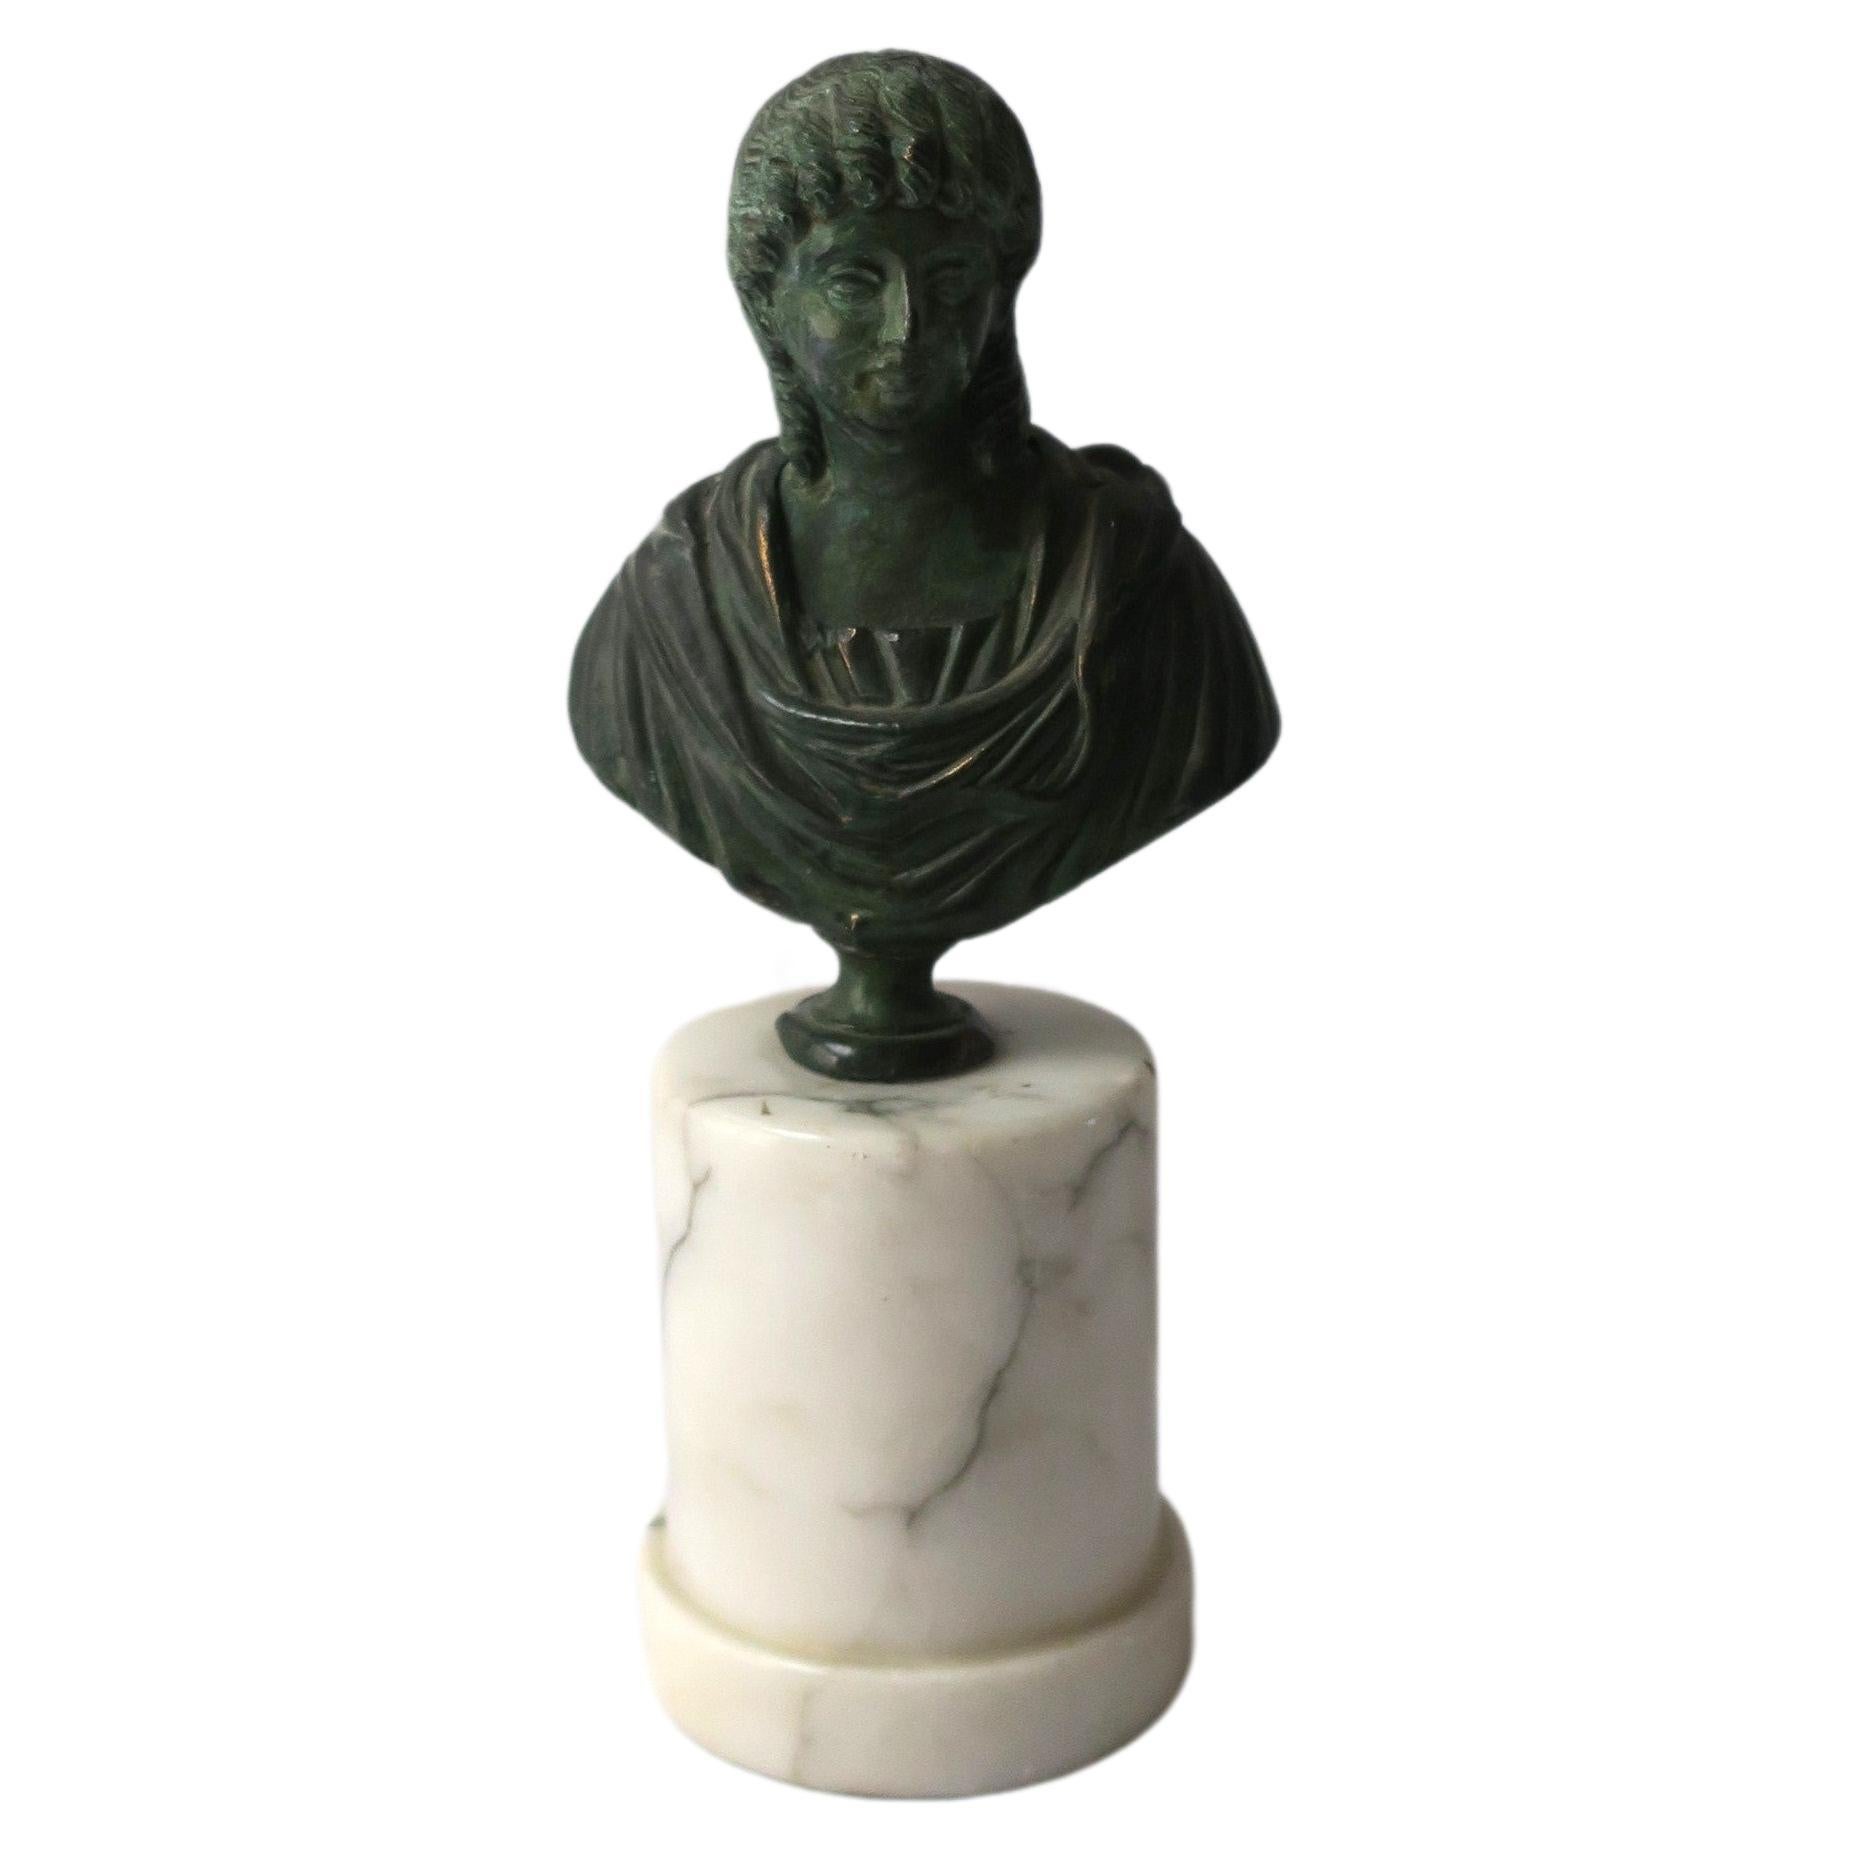 A substantial bronze bust on marble base, Grand Tour style, circa early-20th century, Europe. Bronze bust has a verdigris finish attached to a cylindrical Carrara marble column pillar base. A great decorative object for a table, shelf, library, etc.